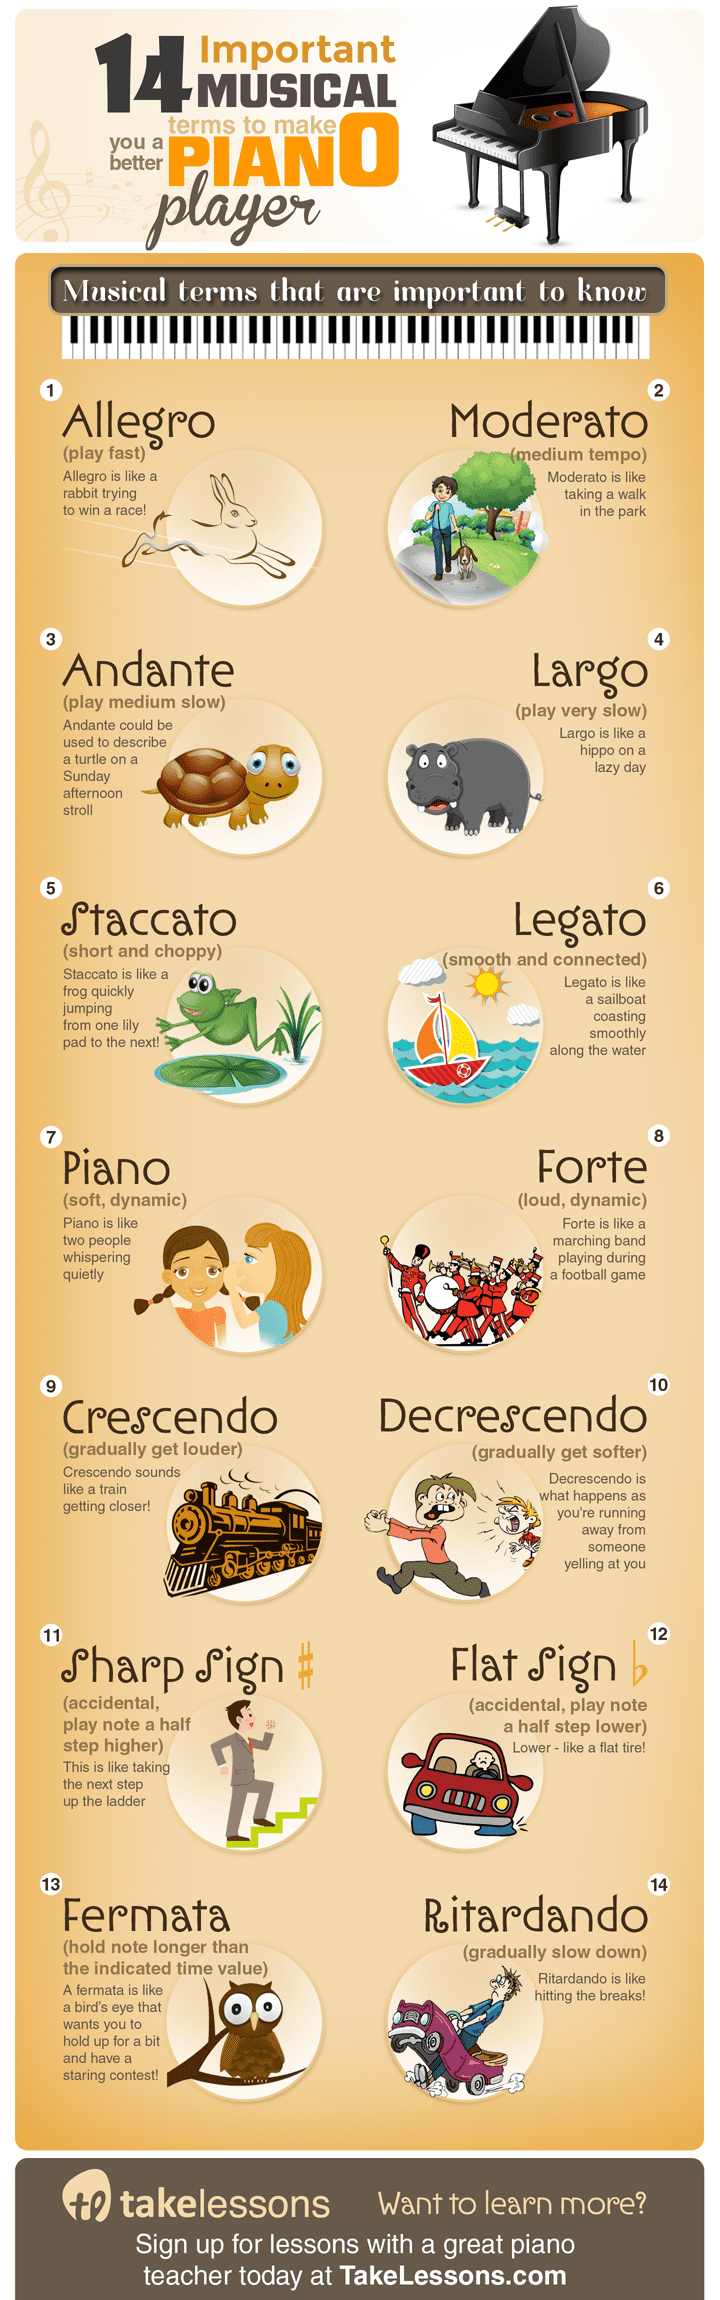 Infographic: 14 Common Musical Terms All Piano Players Need to Know